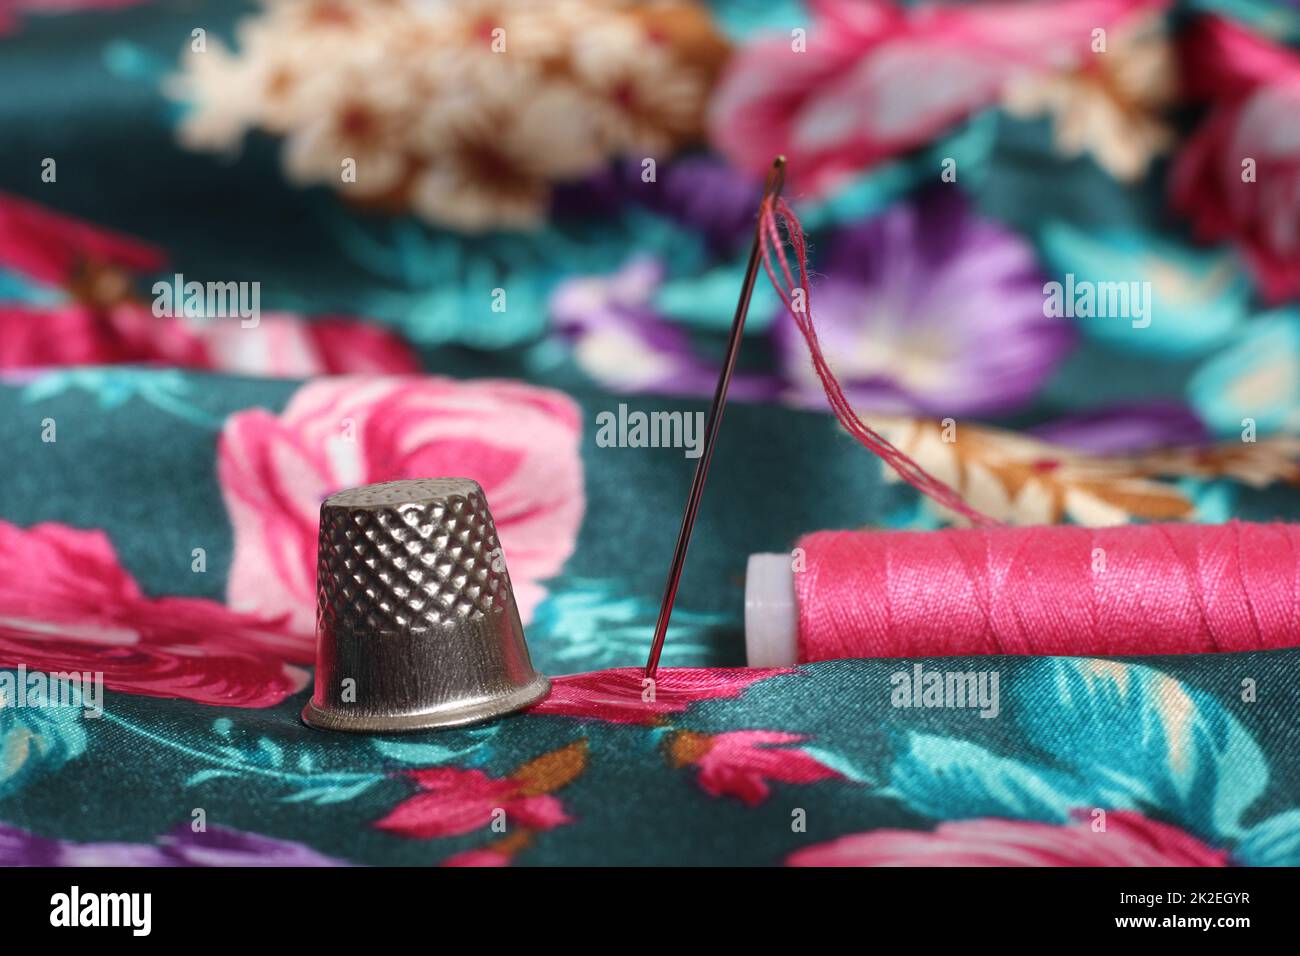 Thimble With Needle and Pink Thread on Vintage Floral Satin Fabric Stock Photo